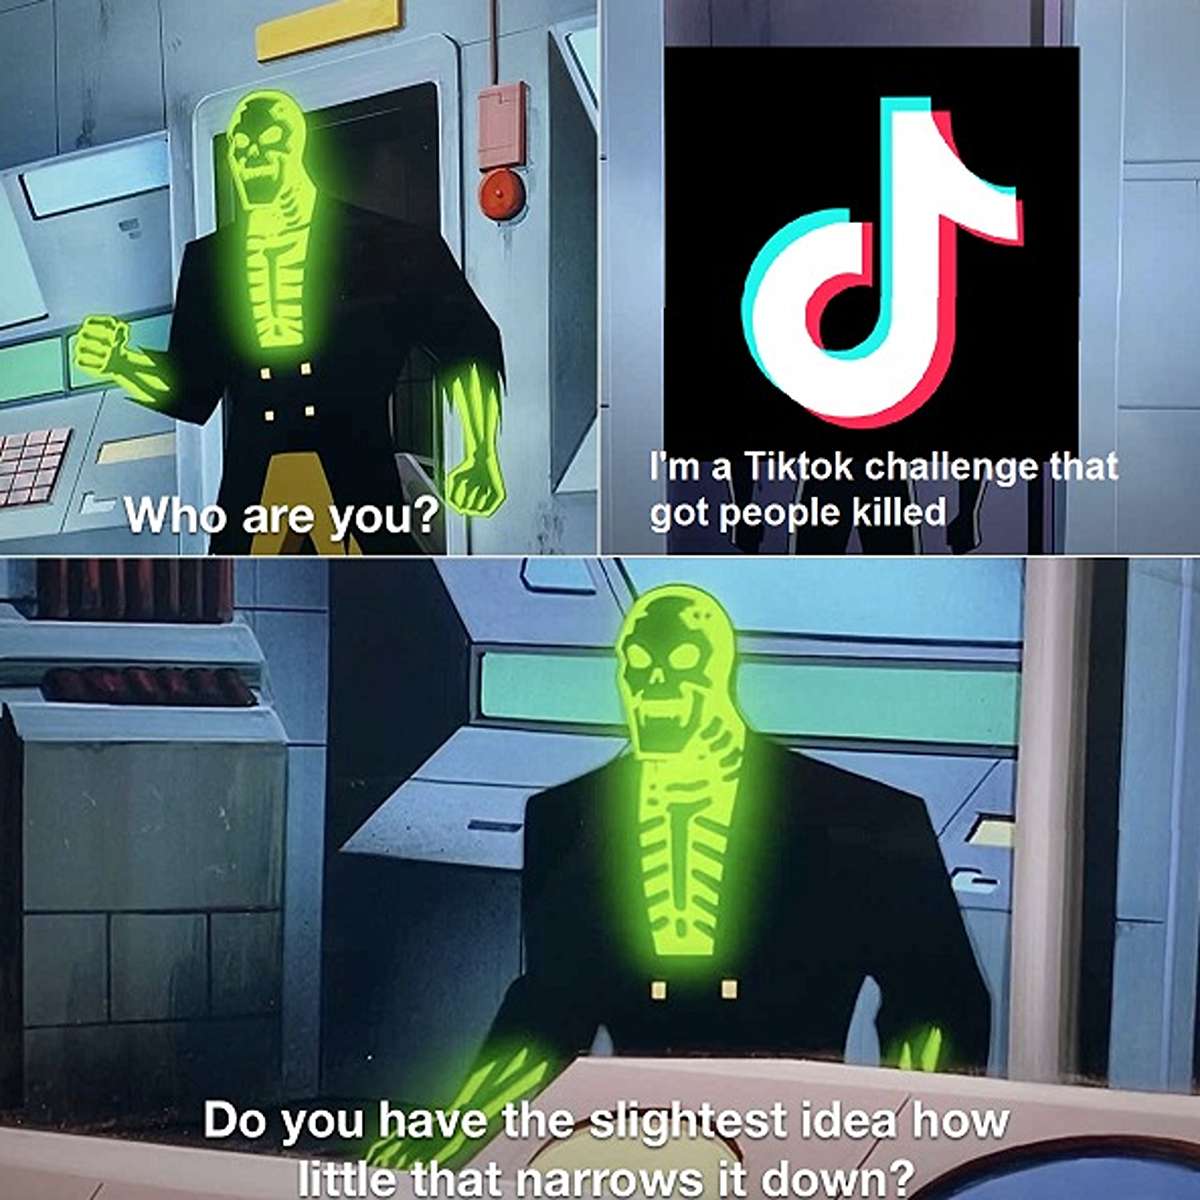 fresh memes - display device - Tw 2010409 Who are you? d I'm a Tiktok challenge that got people killed Do you have the slightest idea how little that narrows it down? 201